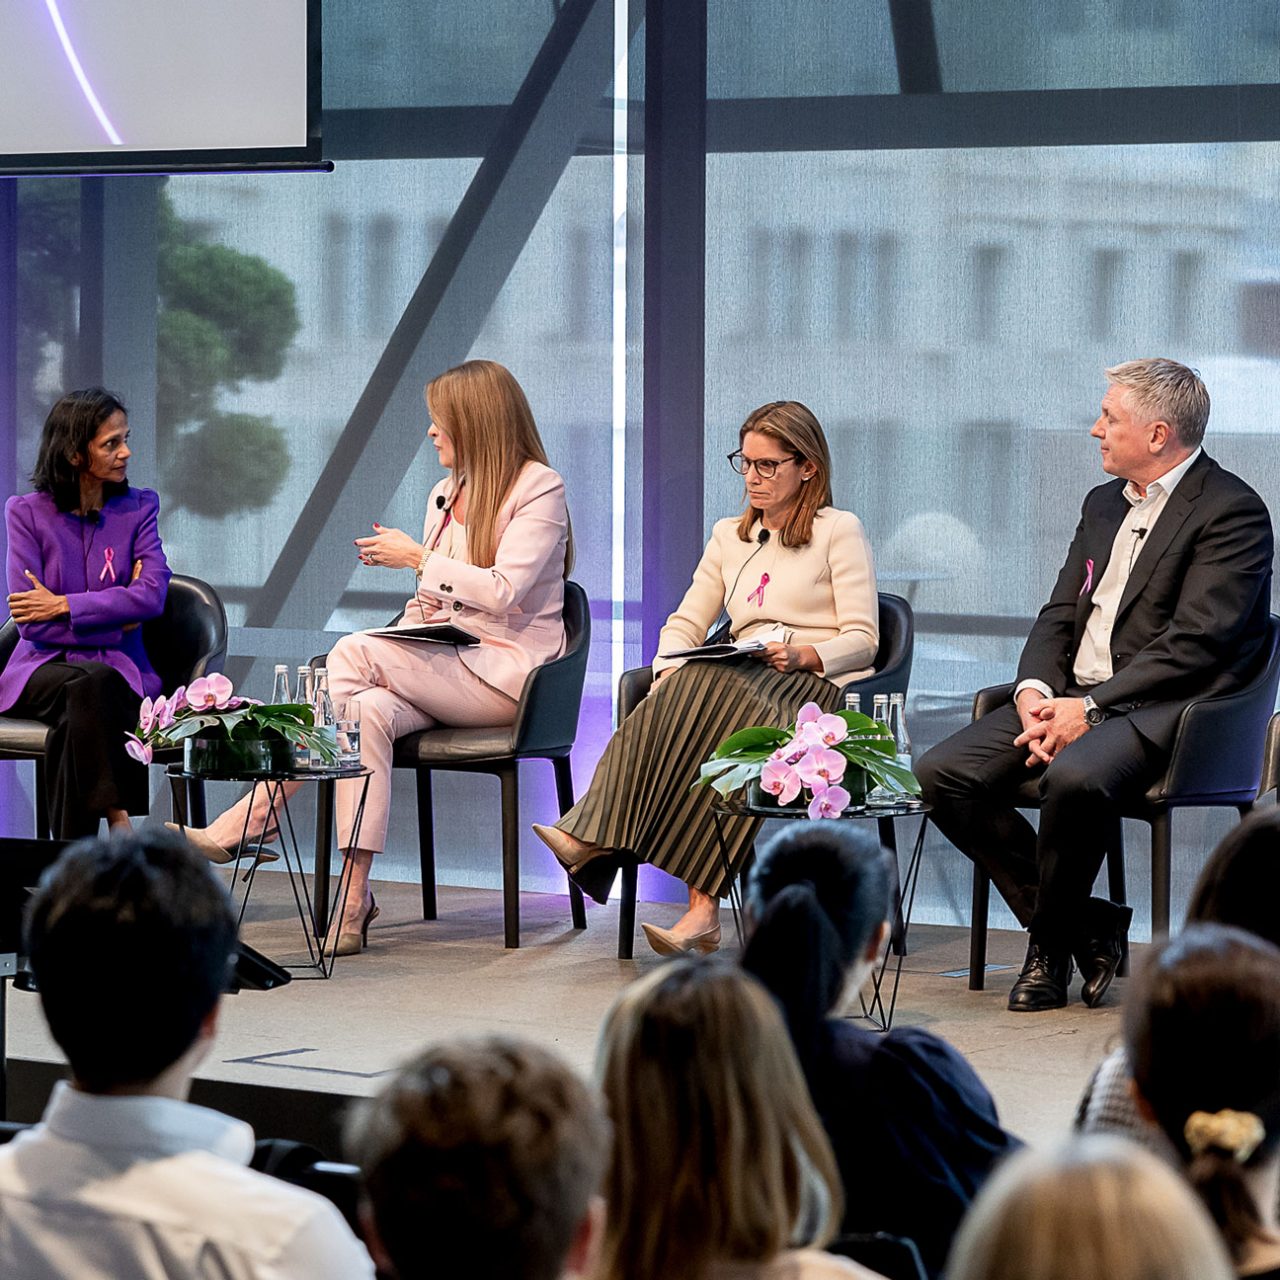 Macquarie CEO Shemara Wikramanayake hosting a panel discussion for International Women's Day